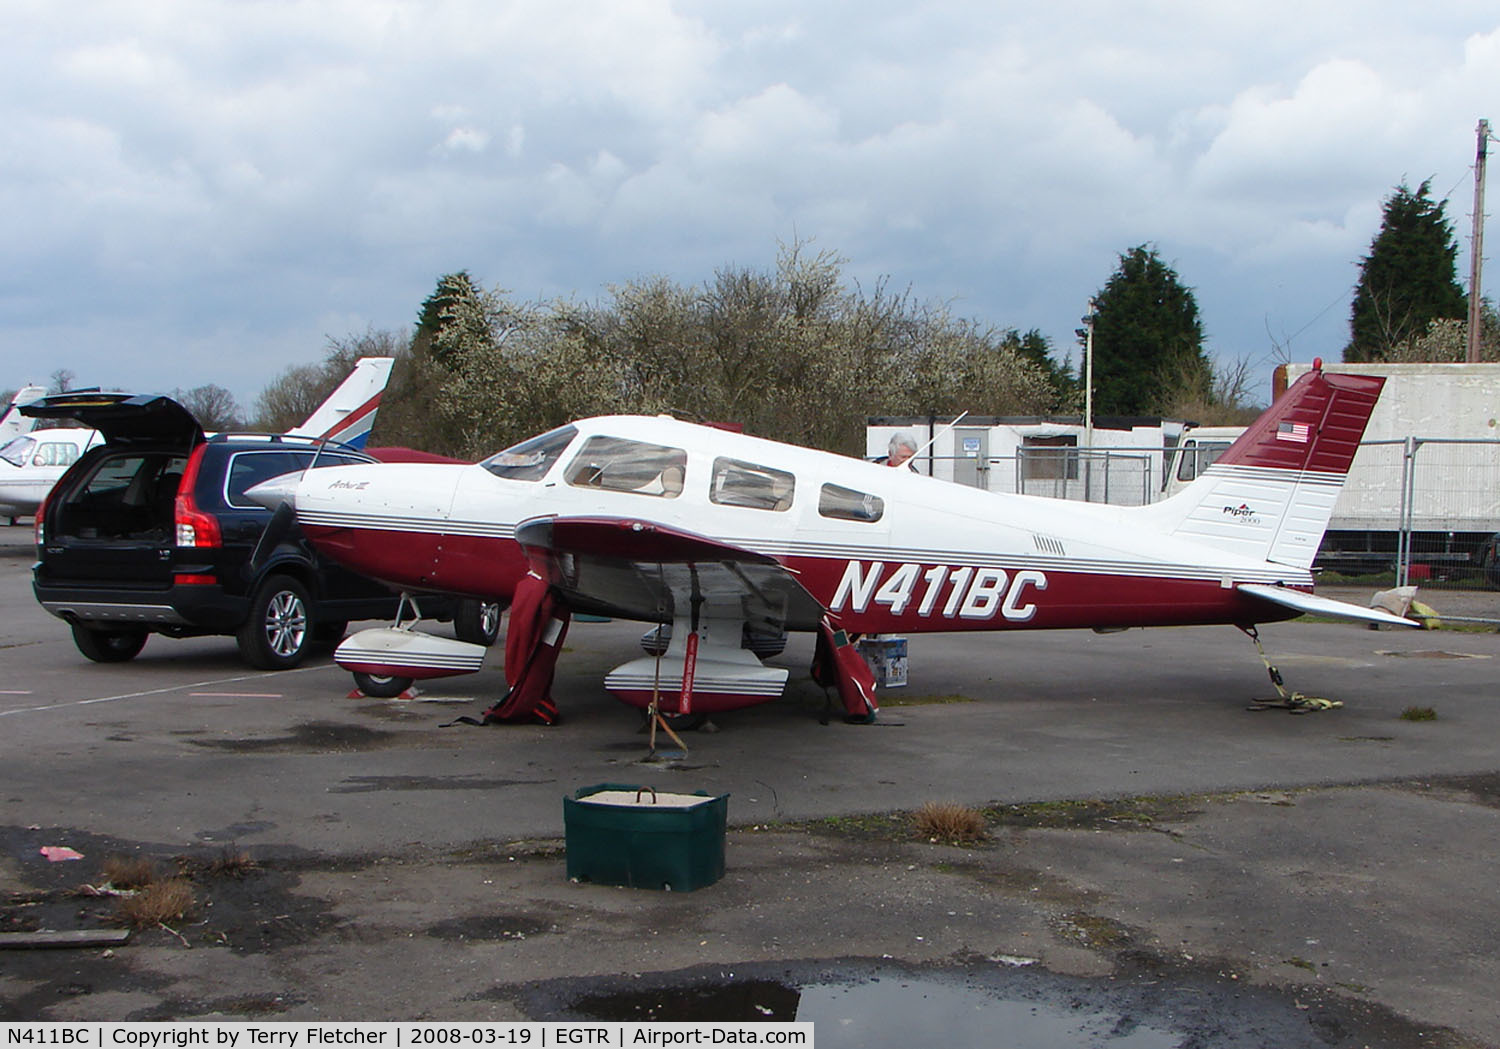 N411BC, 2000 Piper PA-28-181 C/N 2843339, Part of the busy GA scene at Elstree Airfield in the northern suburbs of London